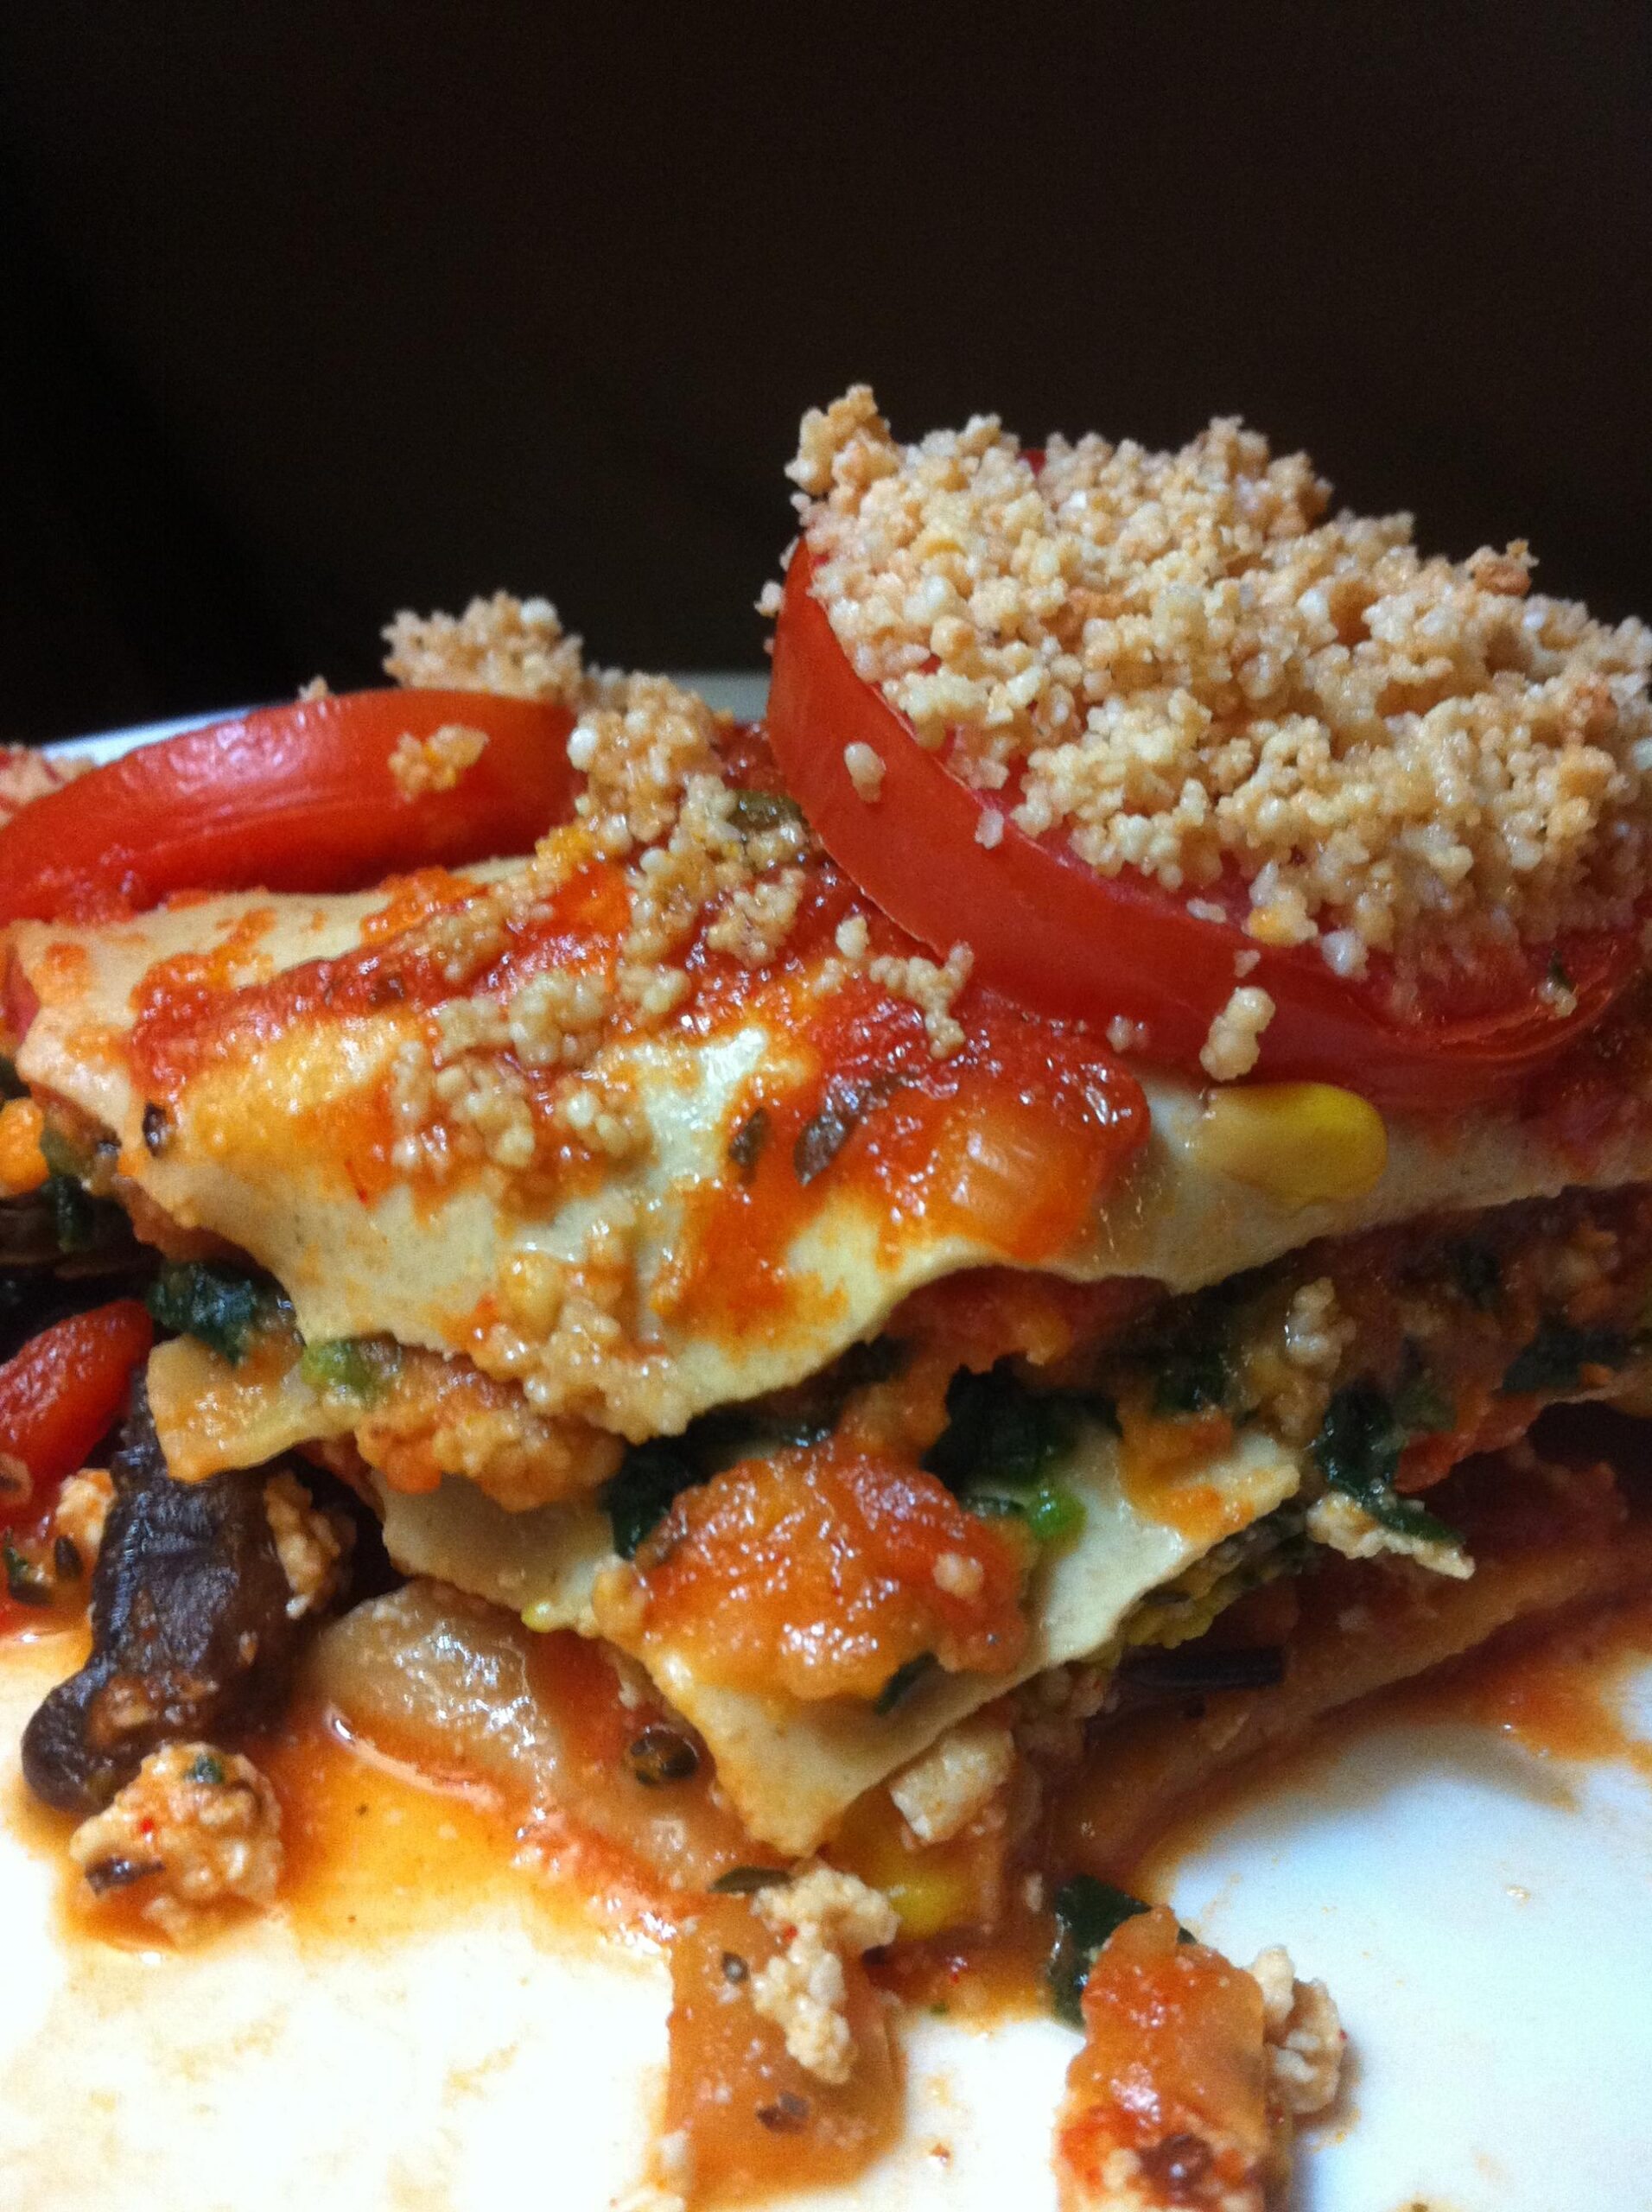  Love sweet potato? Get your fix with this delicious vegetarian lasagna recipe.